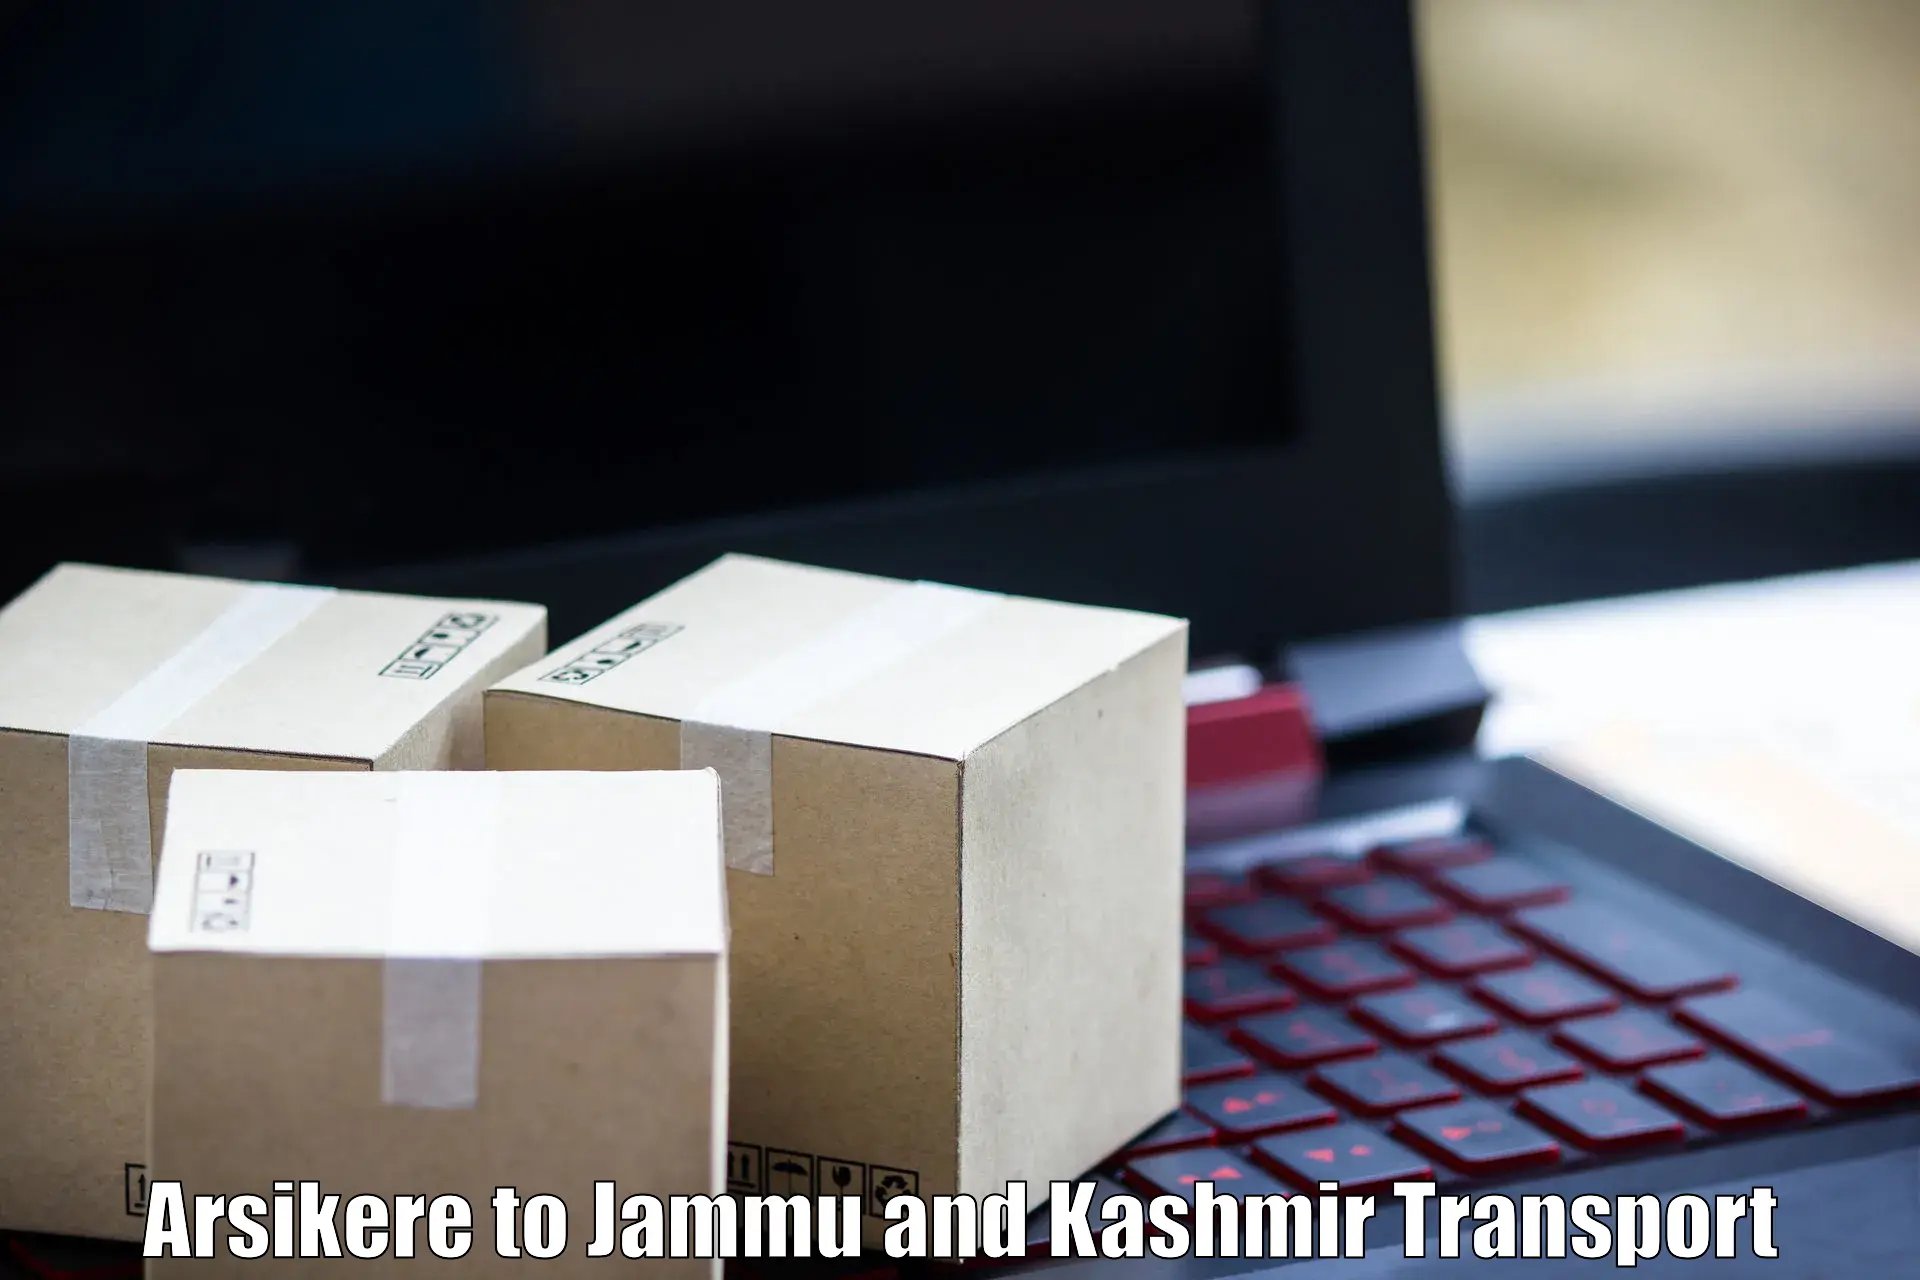 Road transport services Arsikere to Rajouri